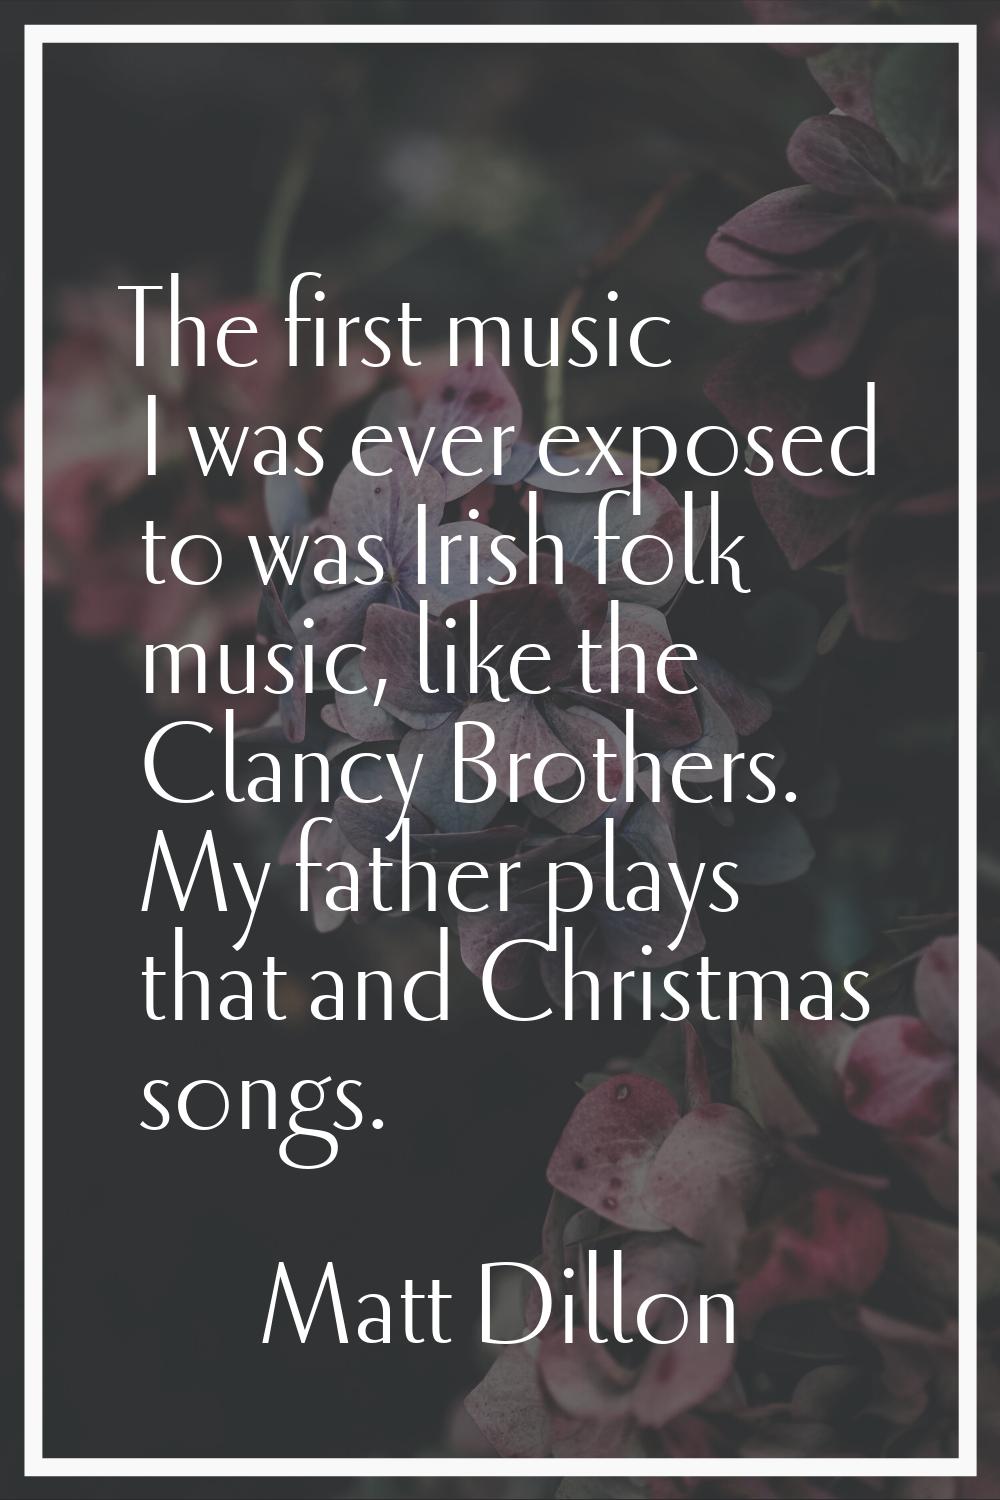 The first music I was ever exposed to was Irish folk music, like the Clancy Brothers. My father pla